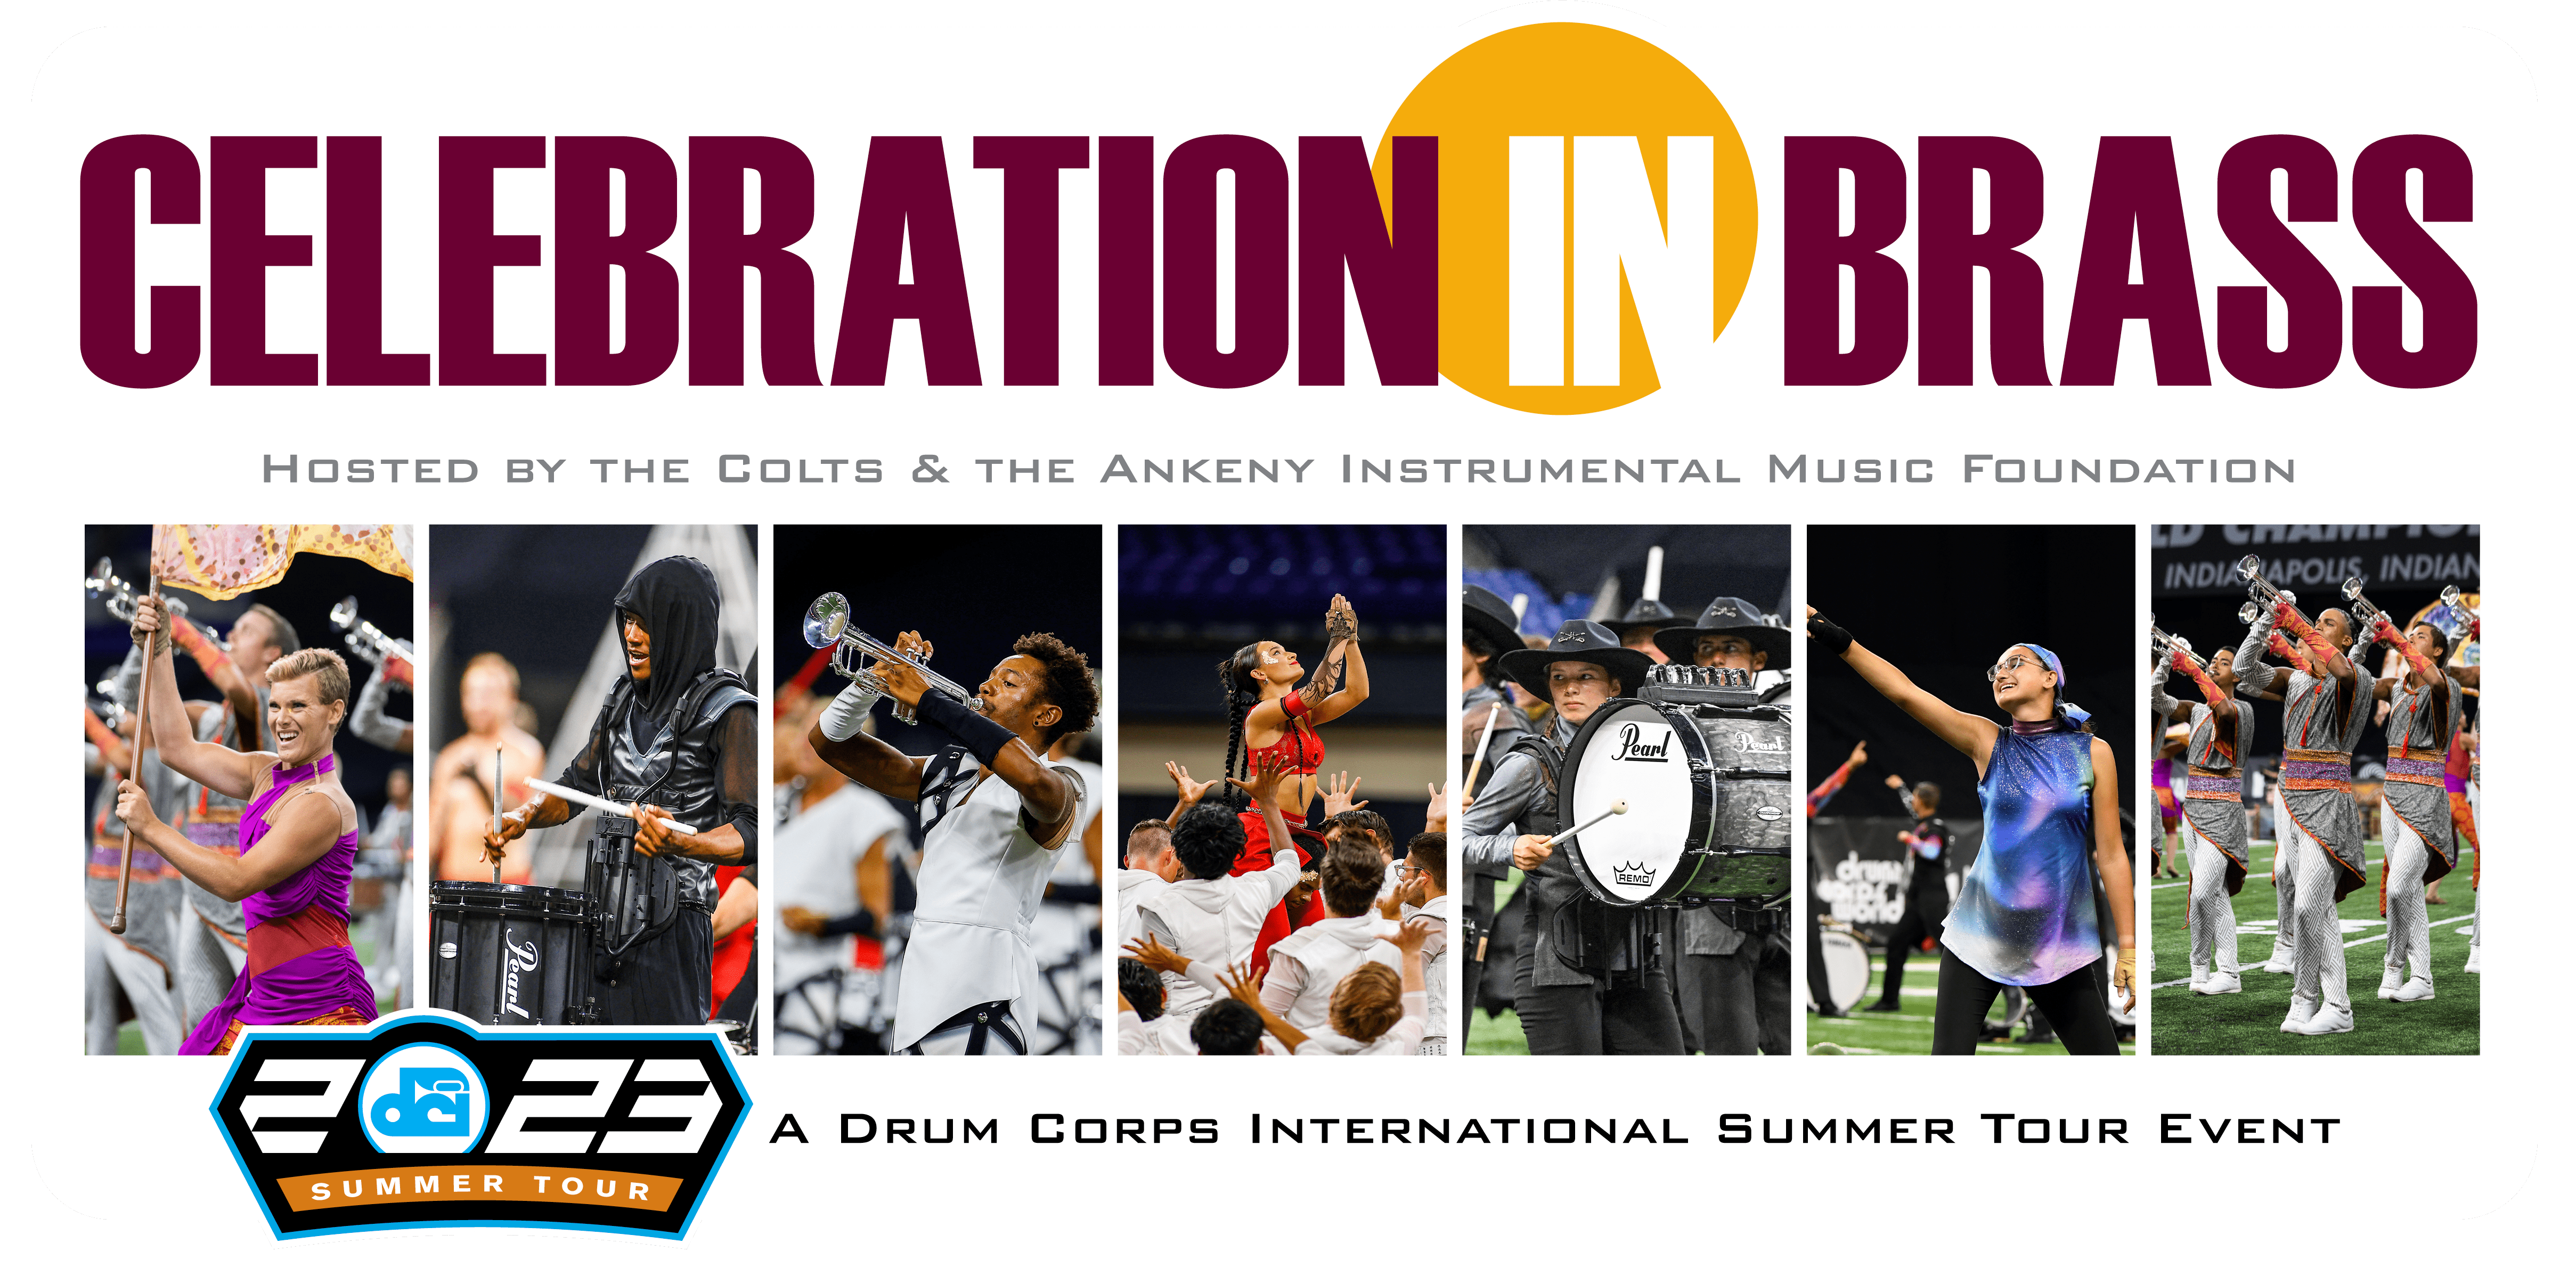 Celebration In Brass, Hosted by the Colts and the Ankeny Instrumental Music Foundation